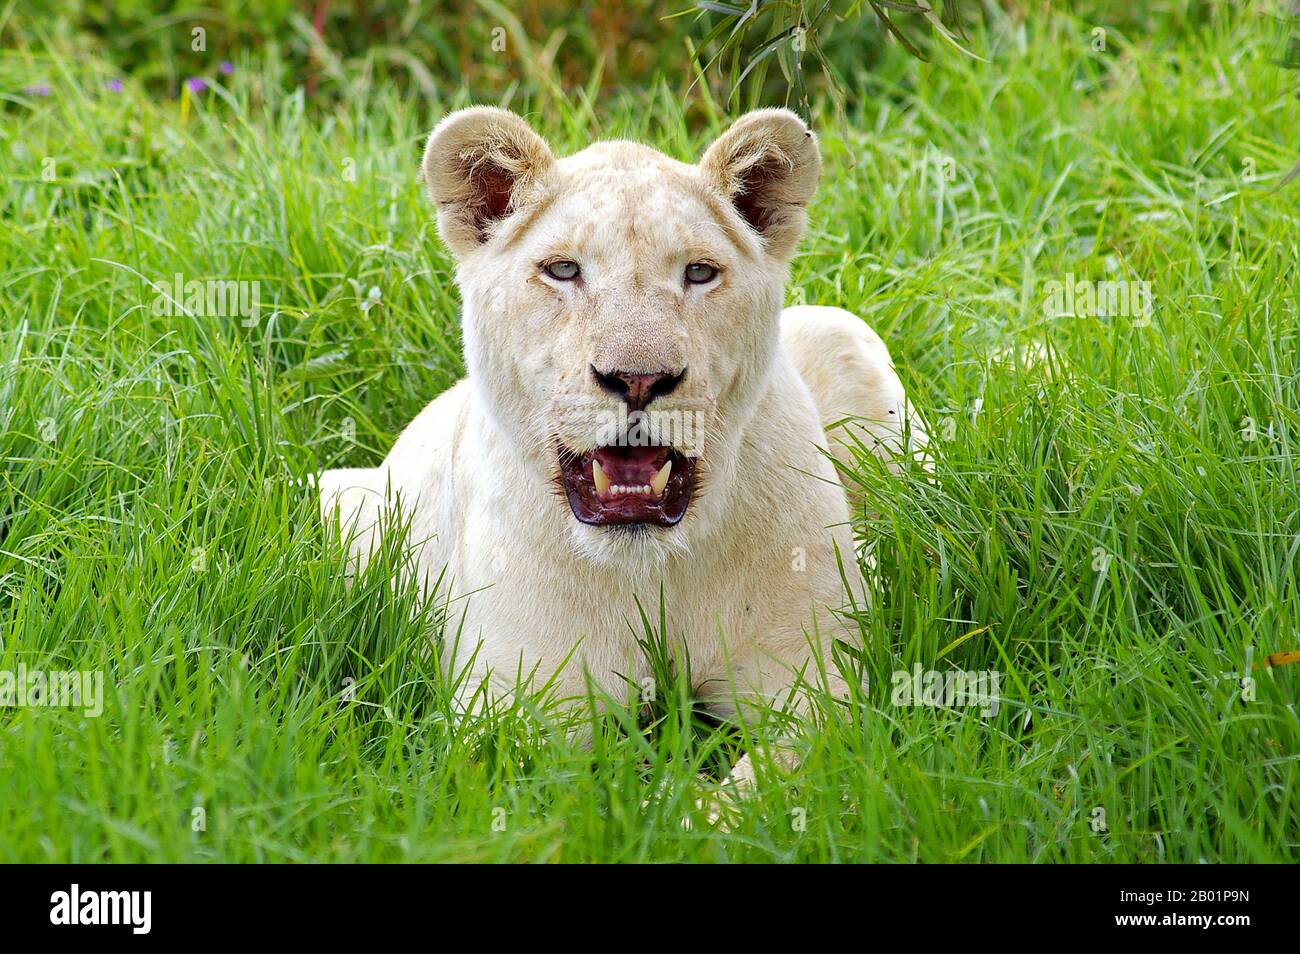 lion (Panthera leo), white lioness, South Africa Stock Photo